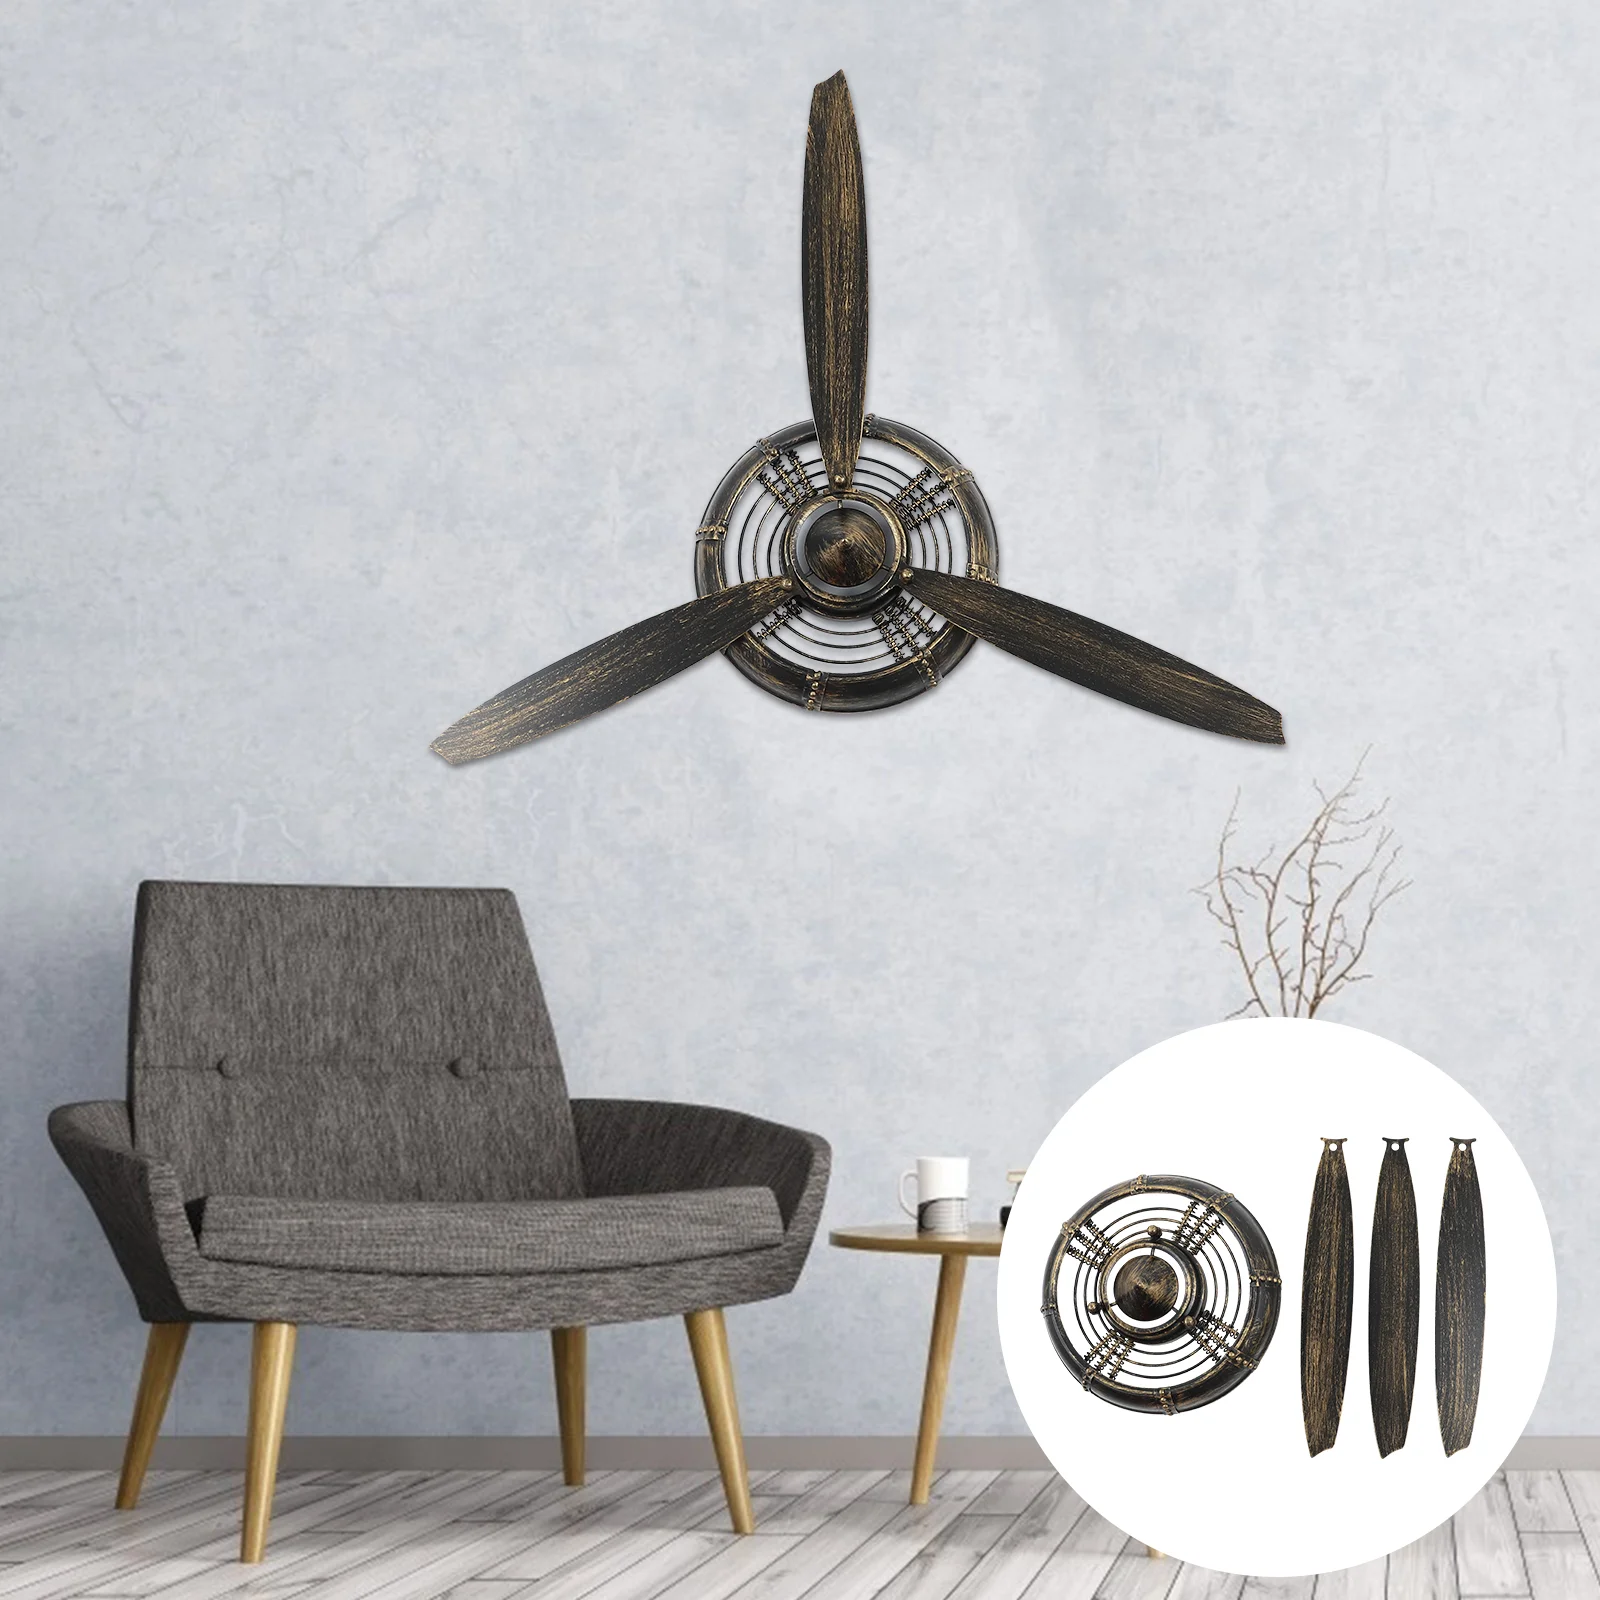 

Propeller Wall-mounted Retro Clock Hanging Decor Coffee Shop Mural Home Iron Ornament Decoration Office Novel